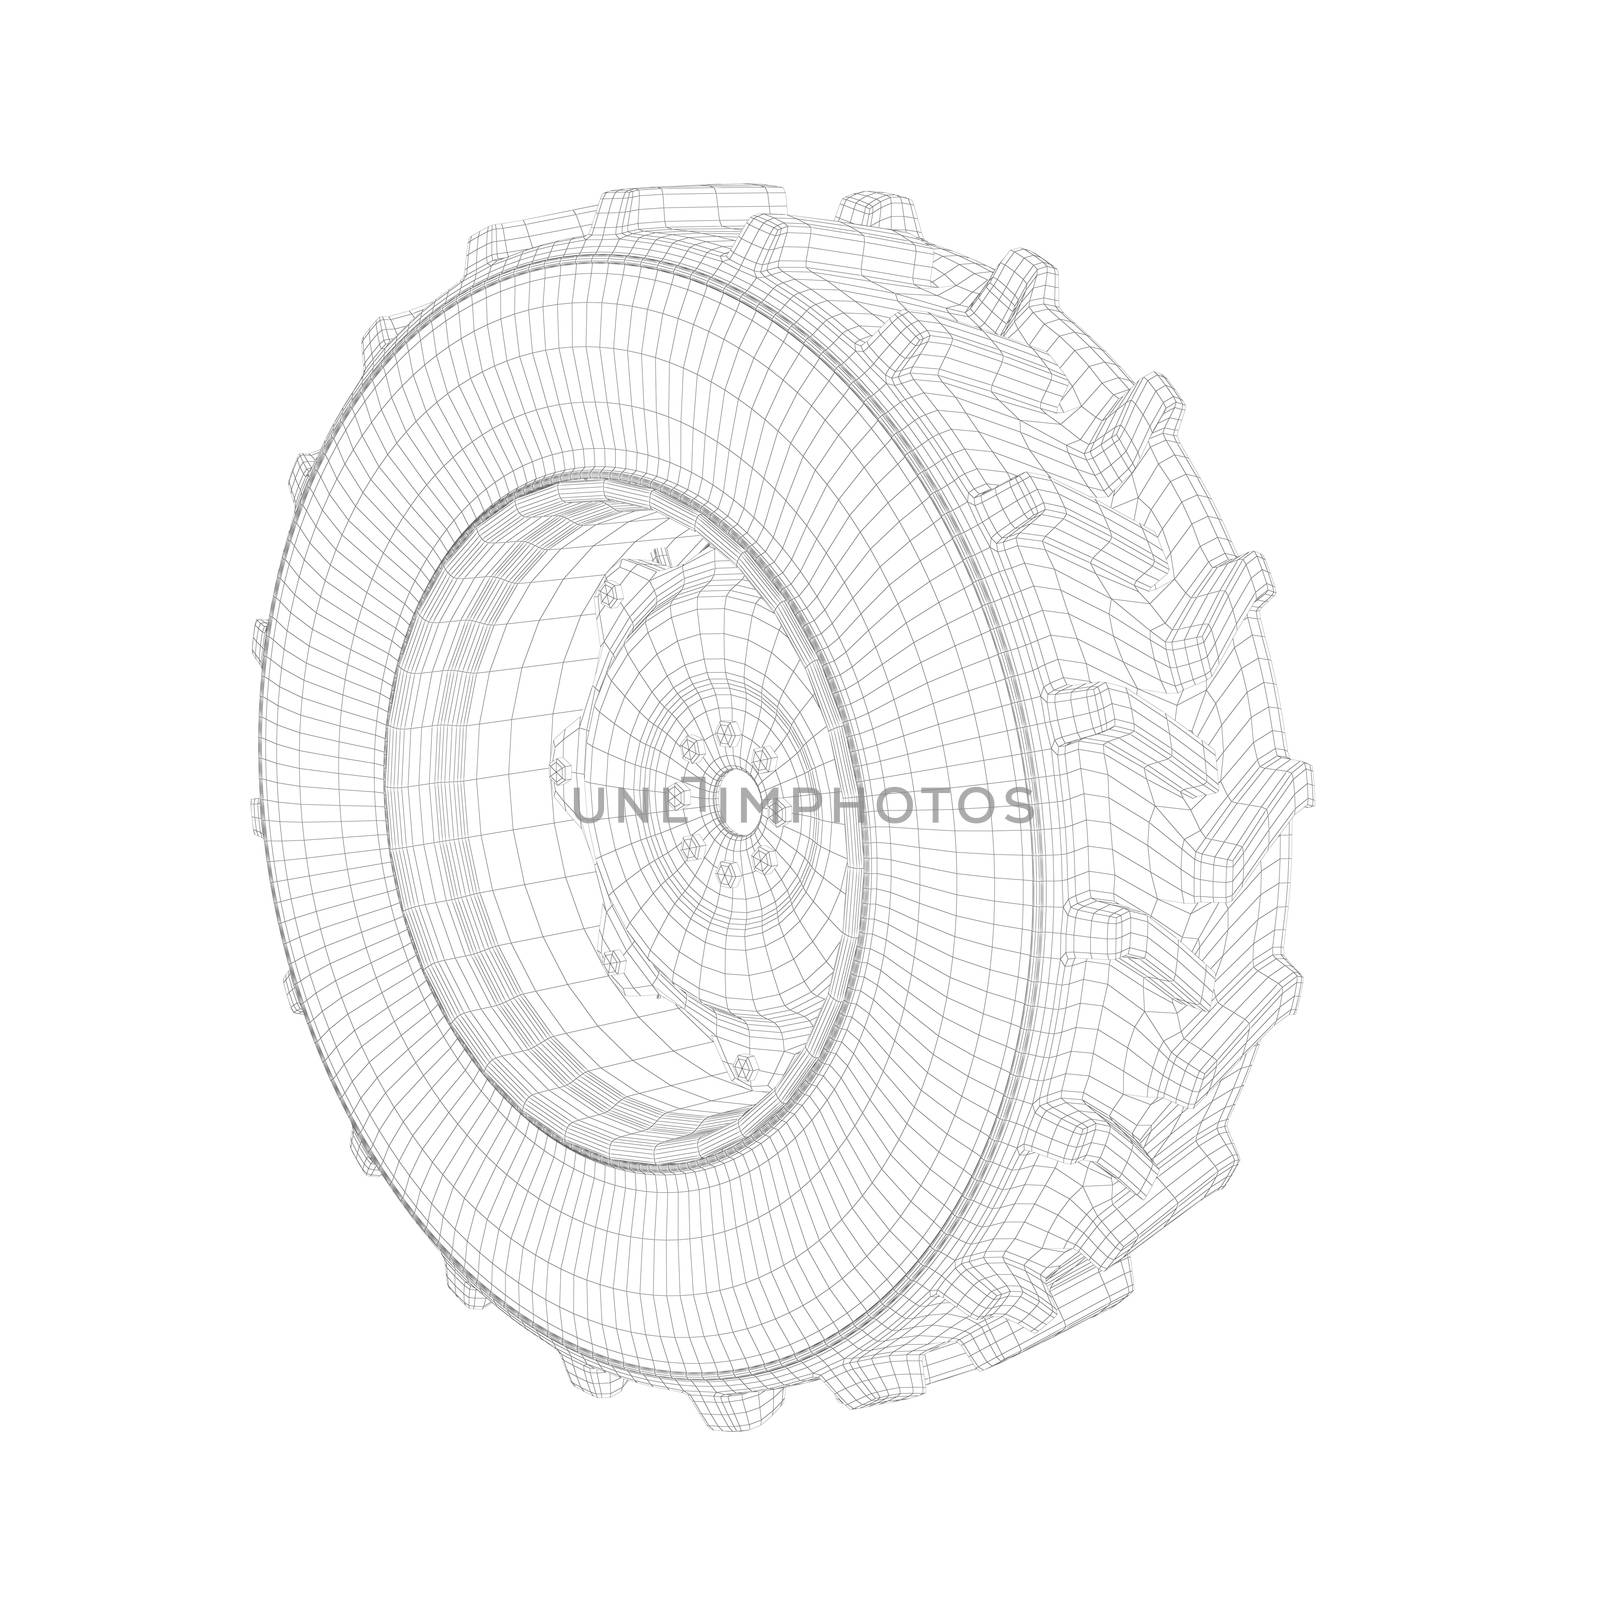 3D wire-frame model of tractor wheel on white background